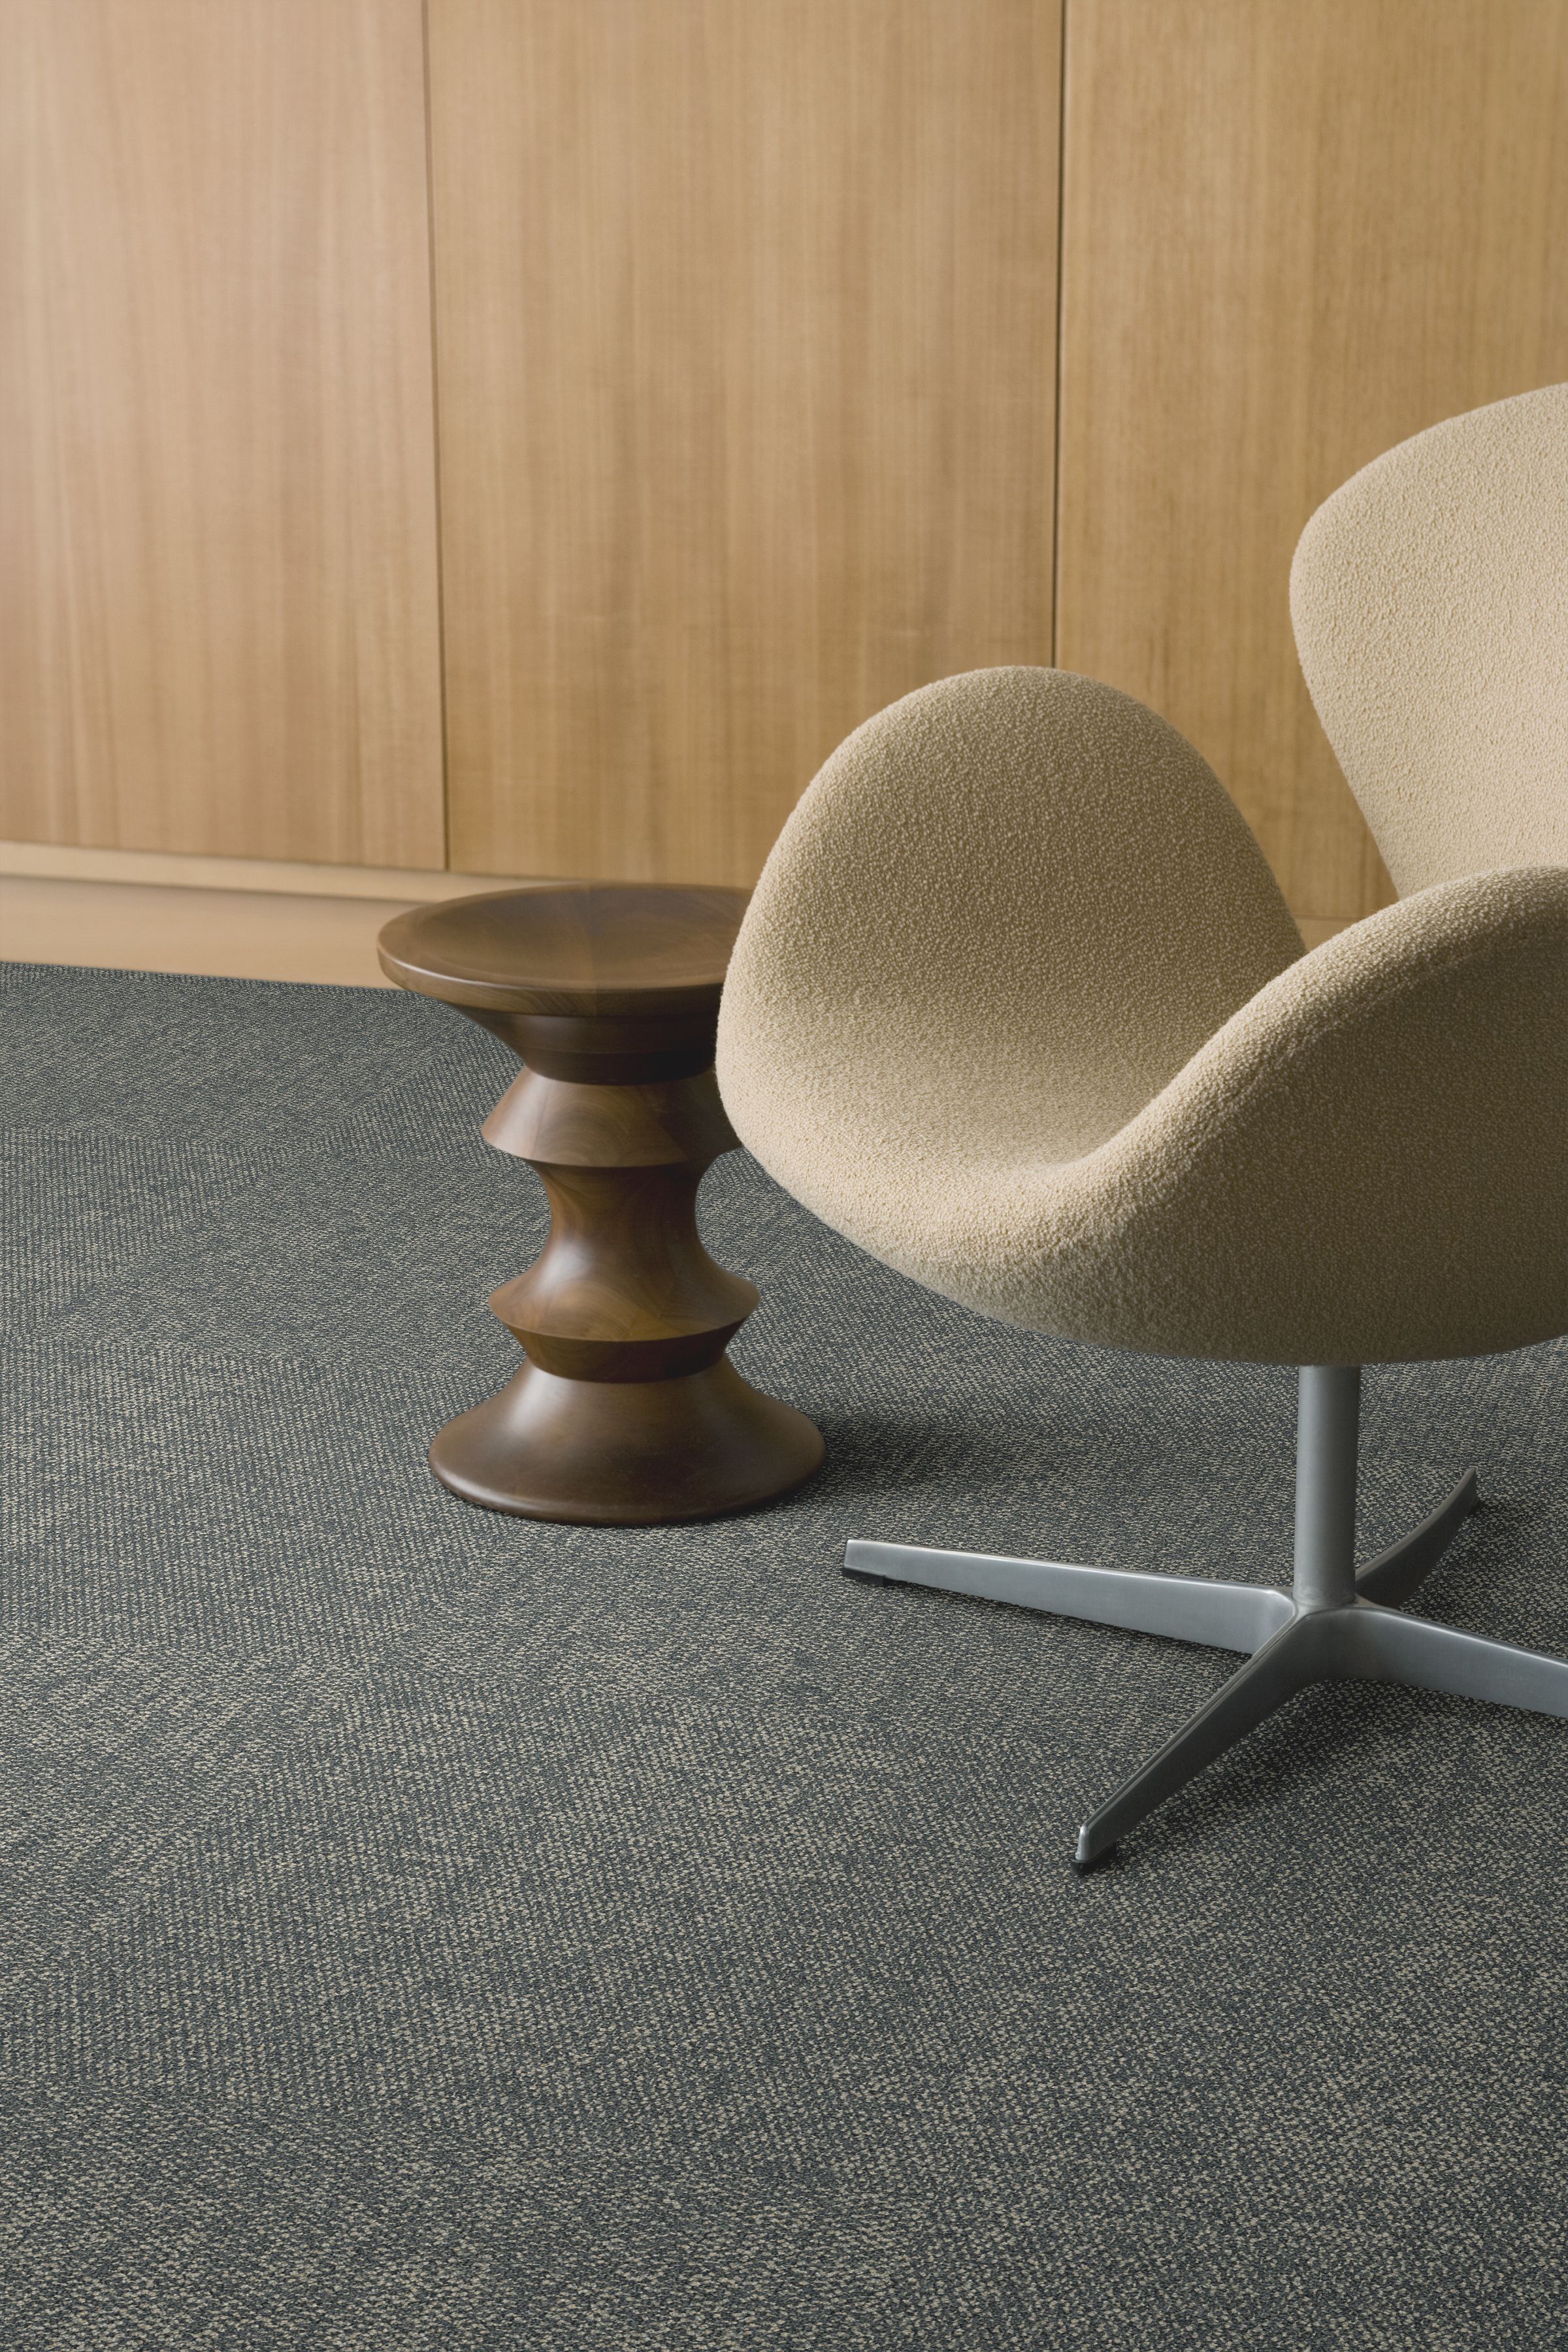 Detail of Interface Lighthearted carpet tile with chair and Eames stool numéro d’image 5